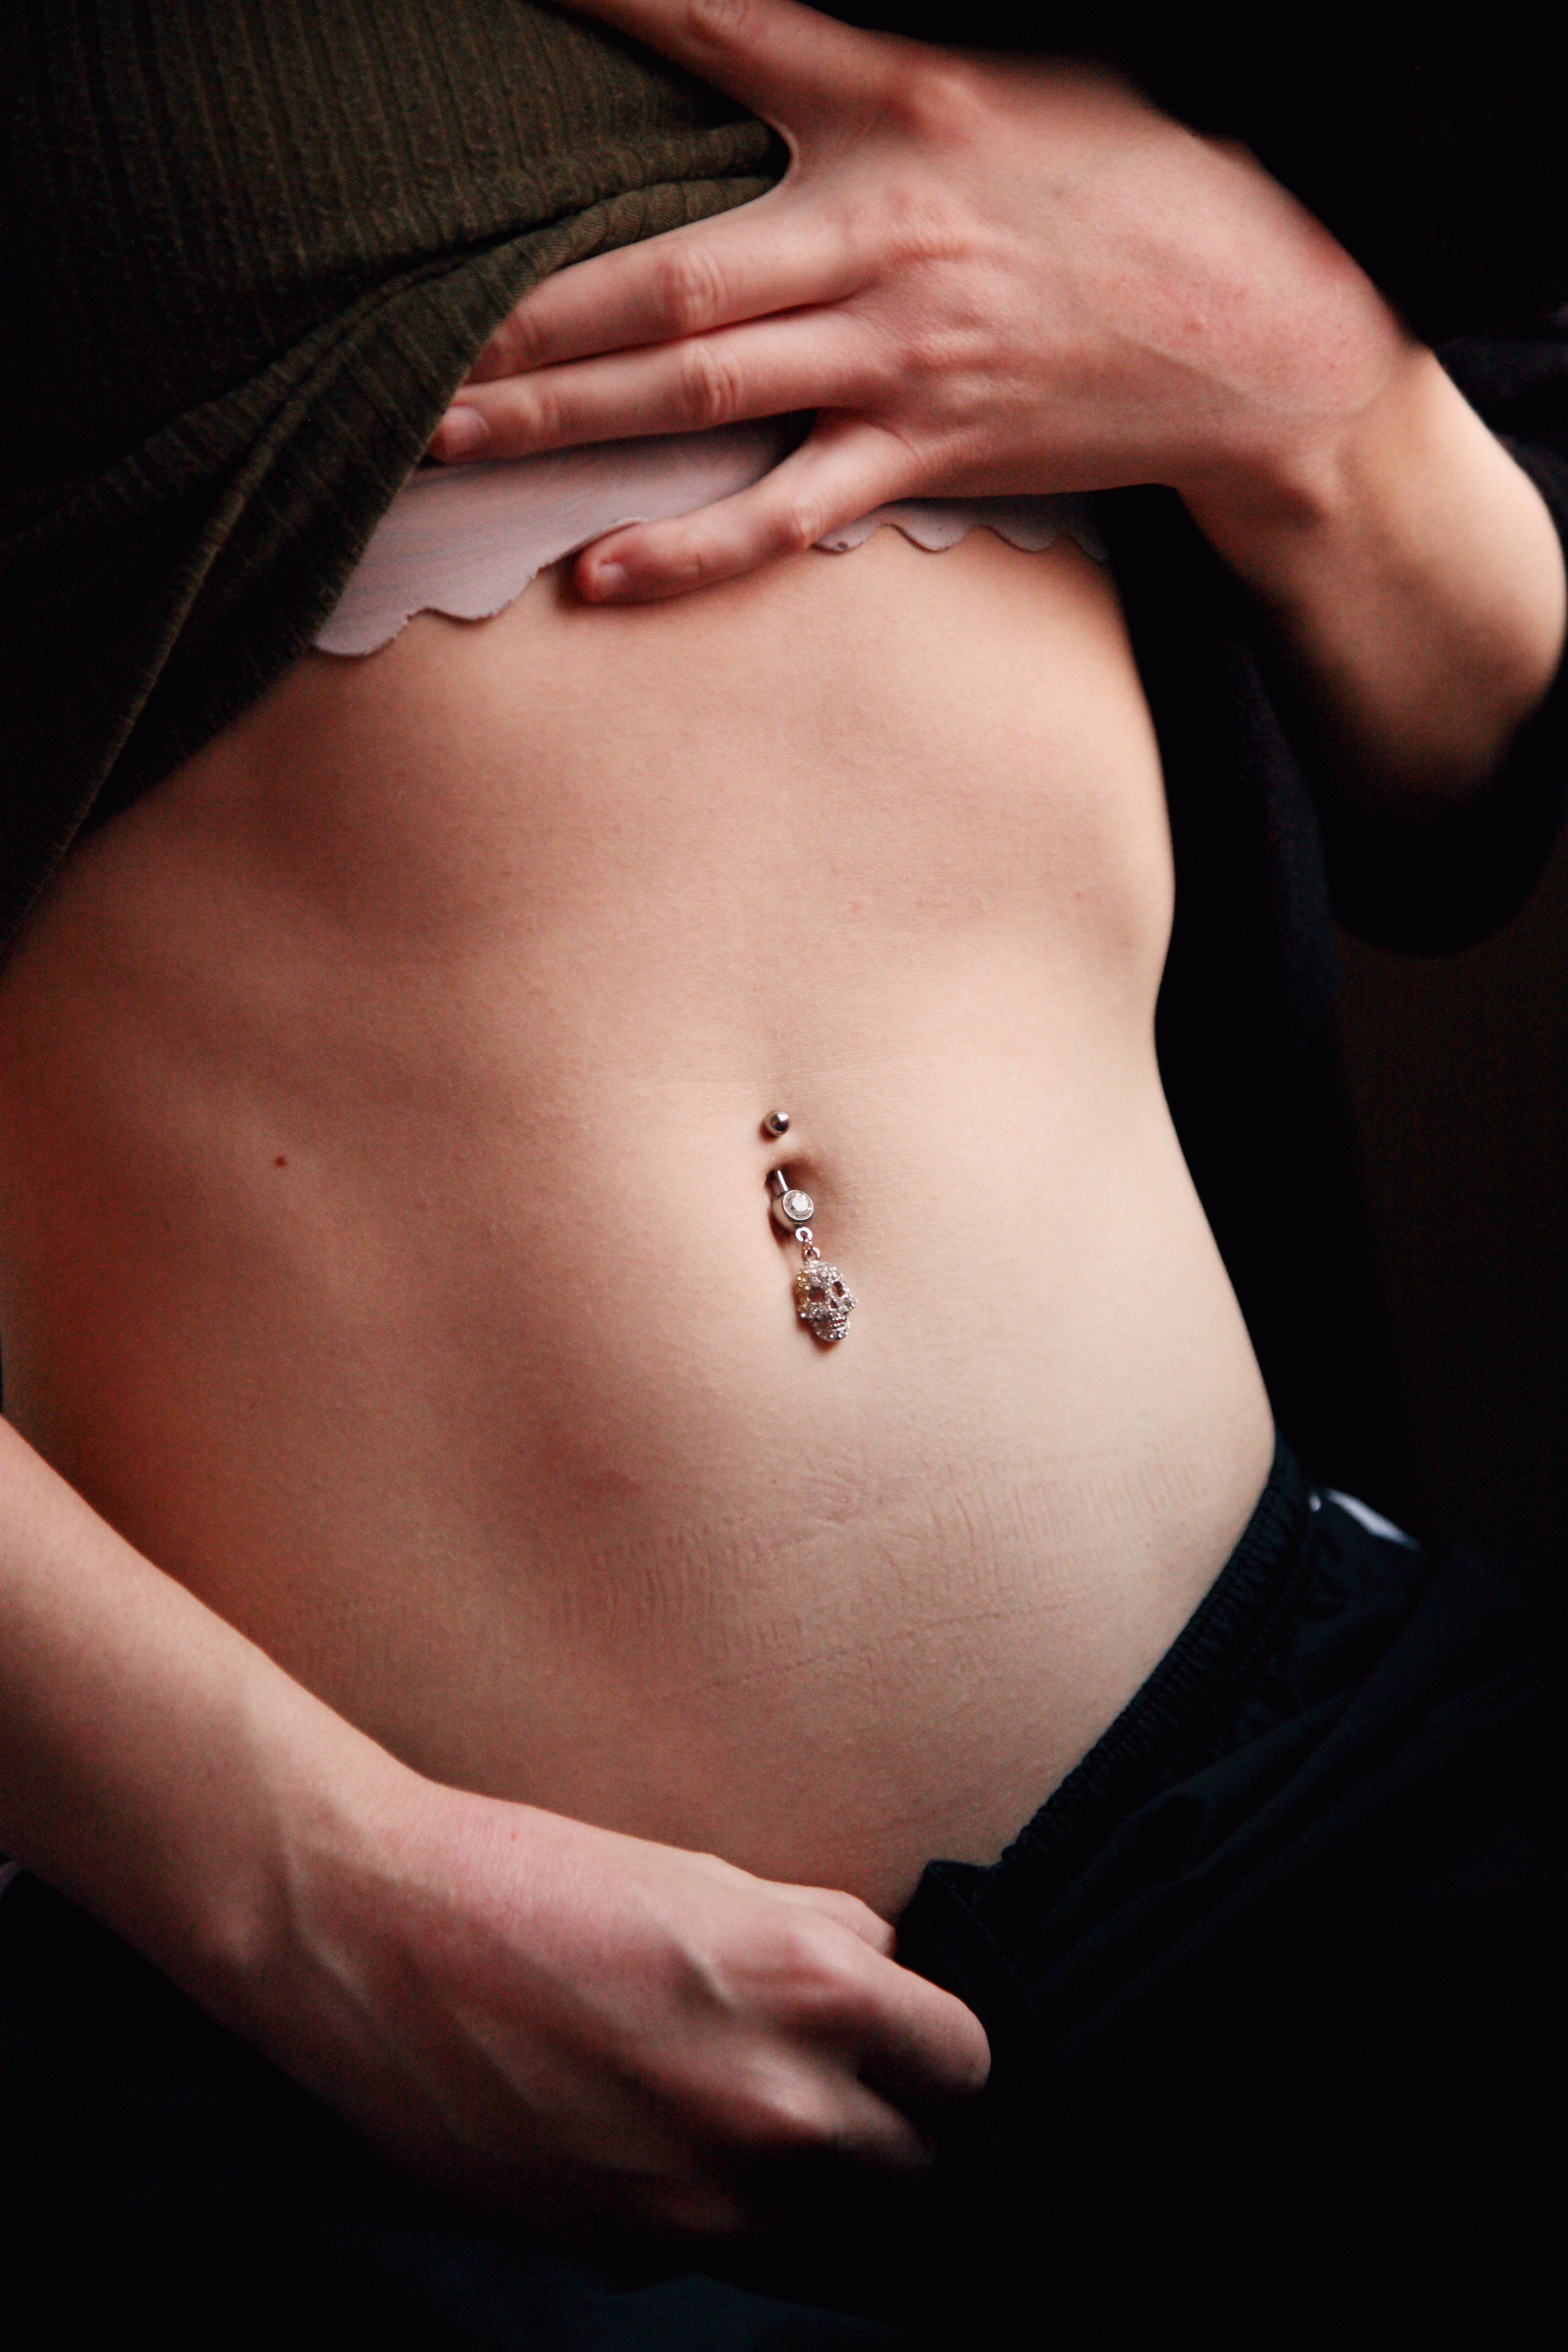 cheryl floyd recommends Pictures Of Belly Button Piercing